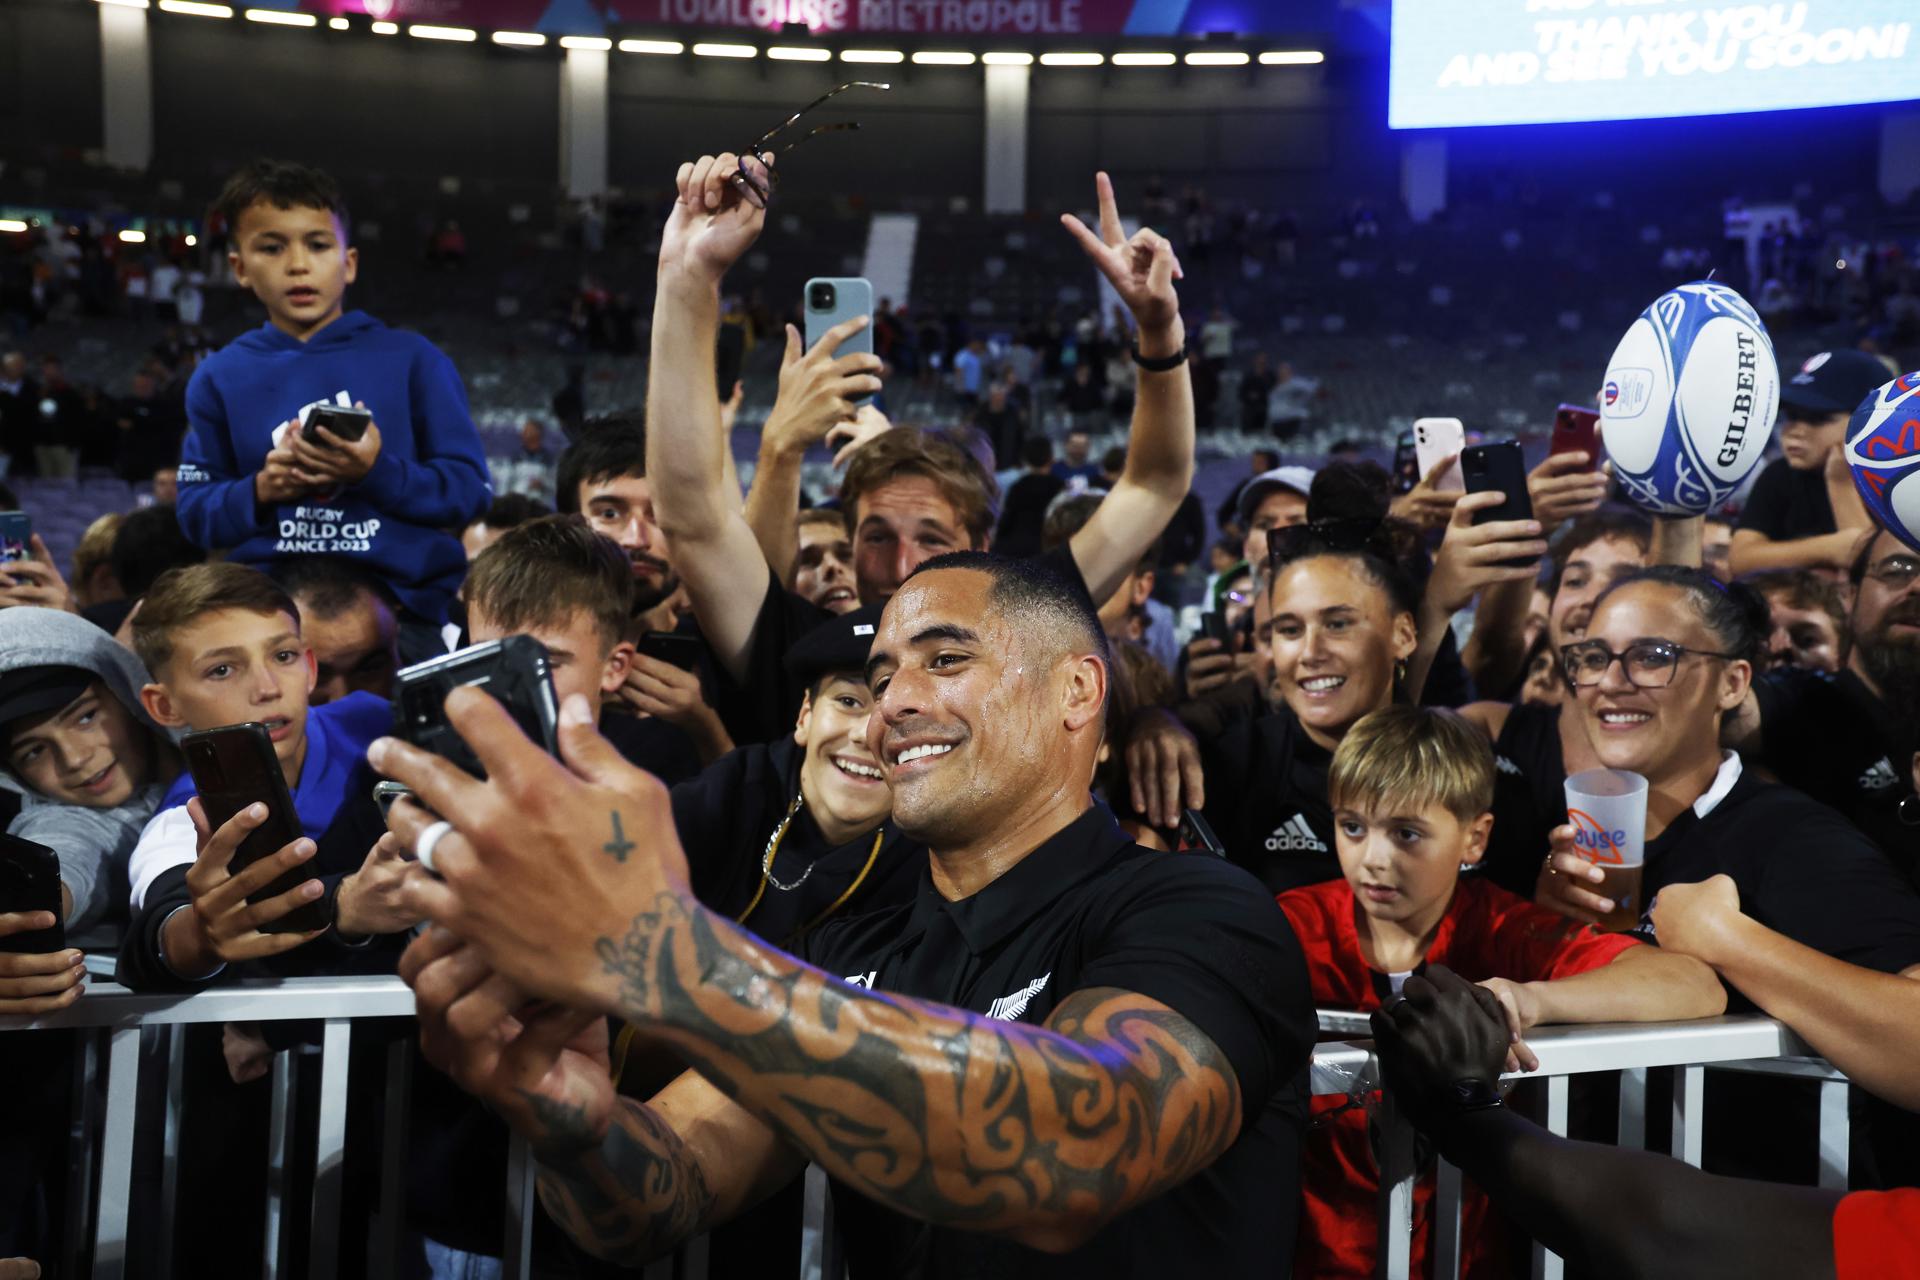 New Zealand's Aaron Smith (C) takes a selfie with supporters after winning the Rugby World Cup Pool A match between New Zealand and Namibia in Toulouse, France, 15 September 2023. EFE-EPA/GUILLAUME HORCAJUELO
